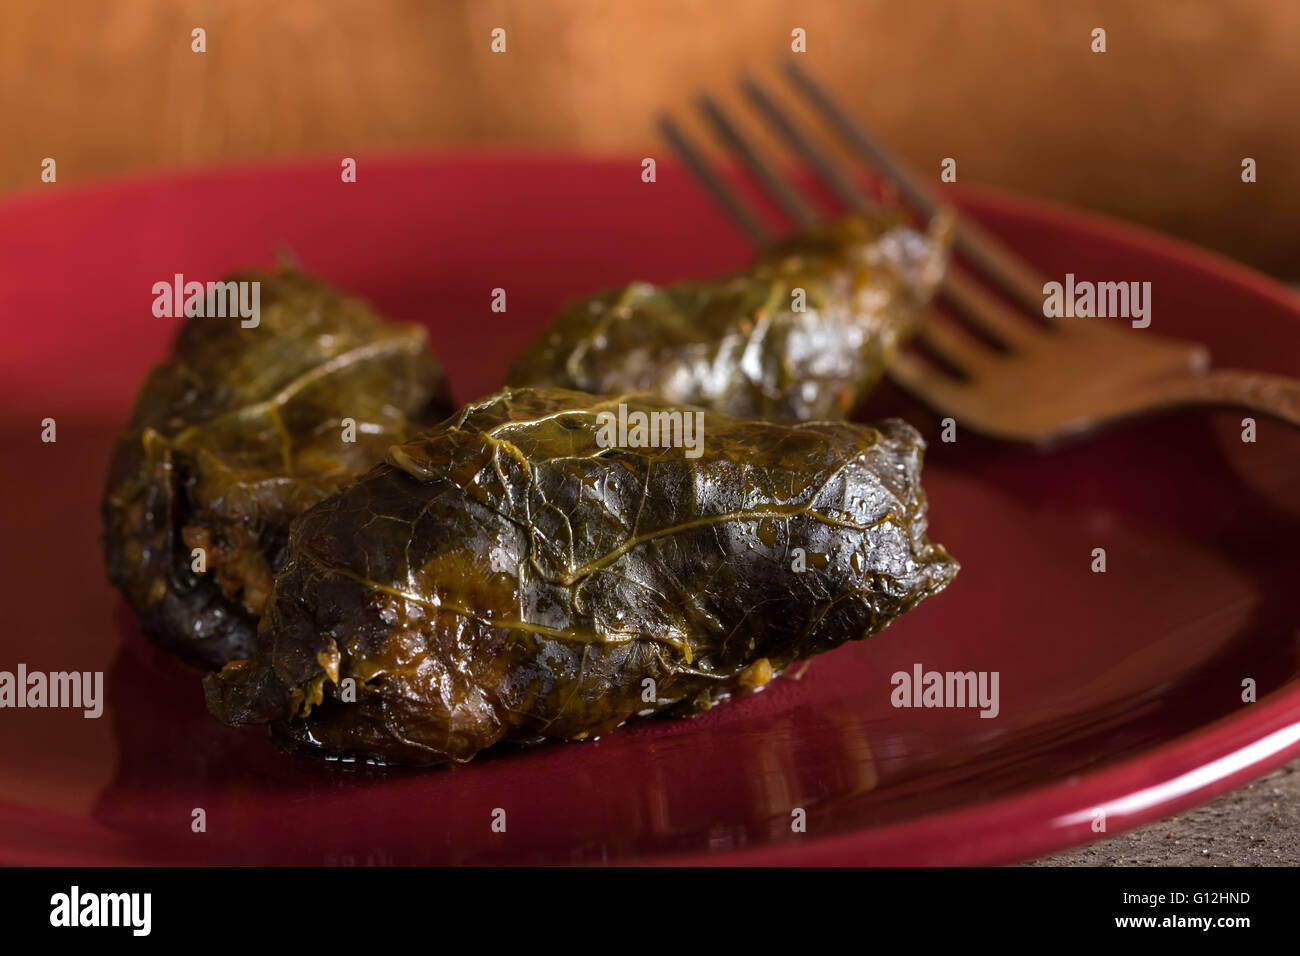 Stuffed cabbage rolls in grape leaves on a red plate with fork Stock Photo